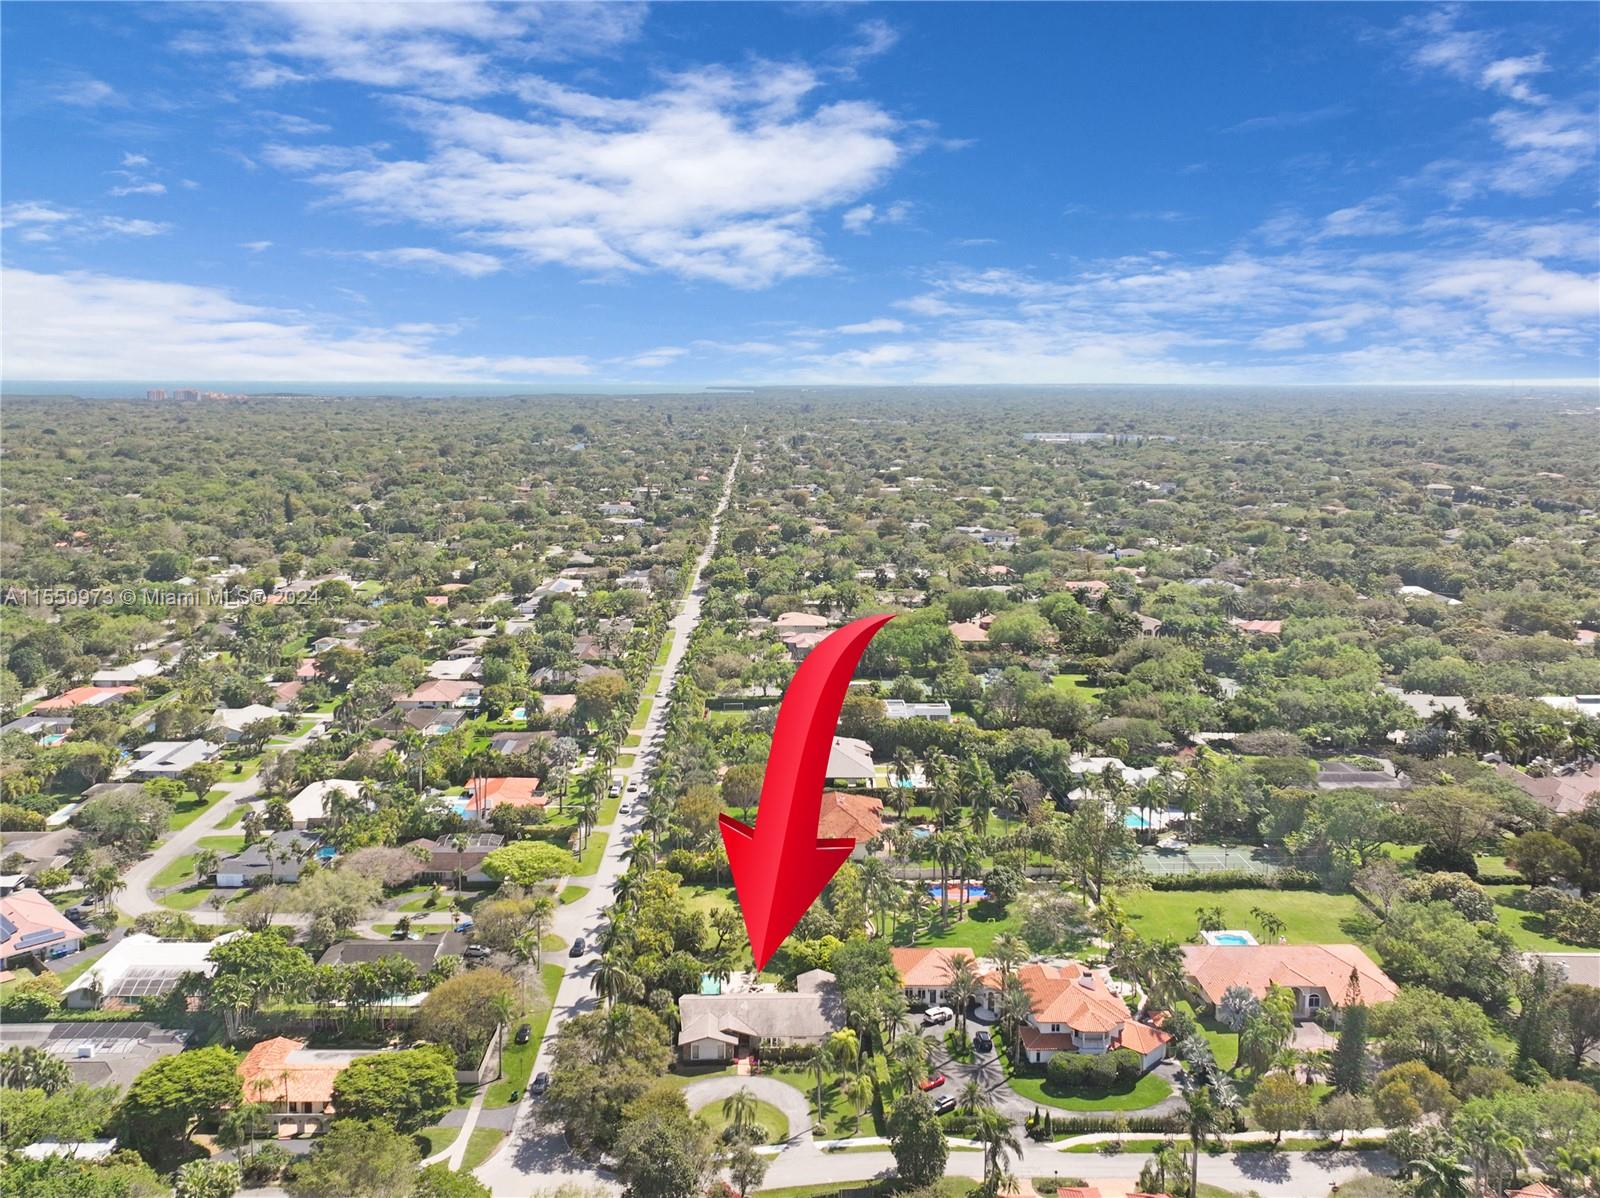 Builders Dream in sought after North Pinecrest. Builder acre corner quiet lot. 
*acquire sellers as tenant while plans and permits being drawn up.* 
Opportunity knocks ONCE. Contact LA